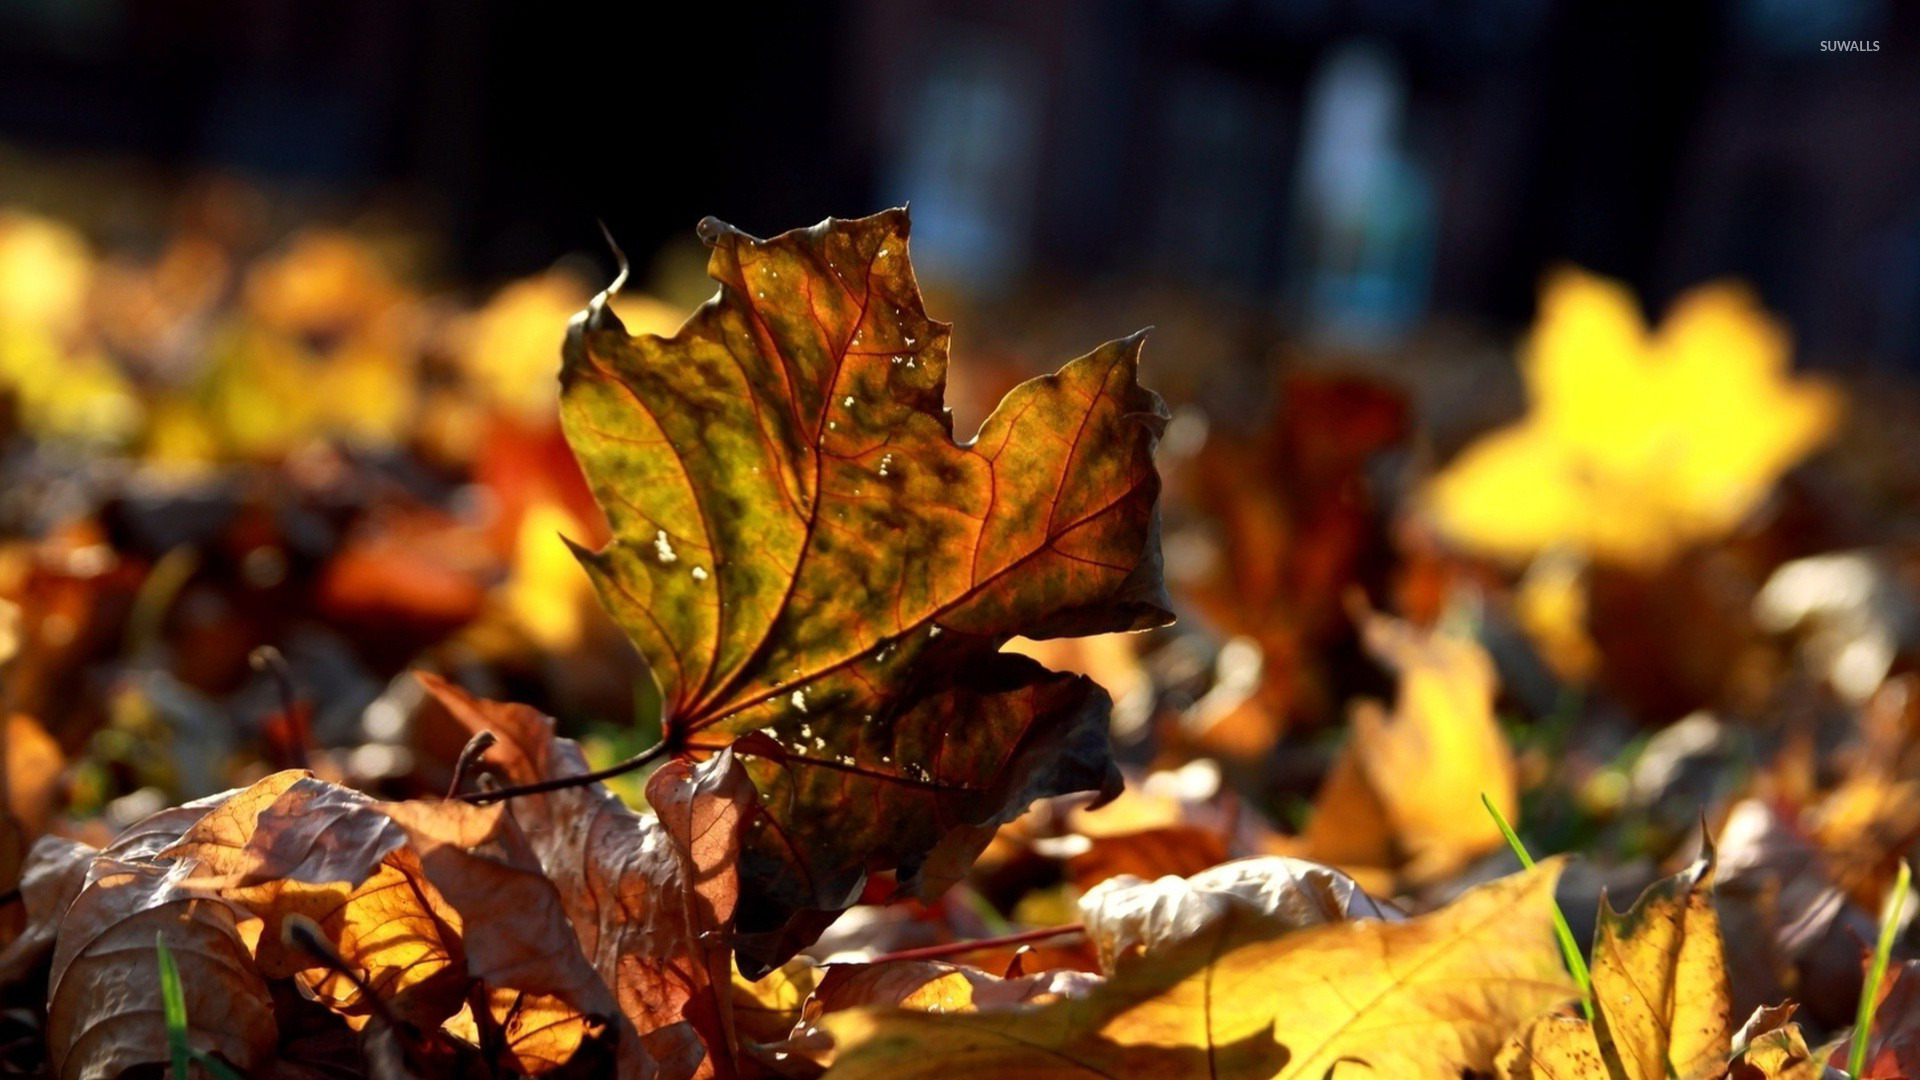 Dry Autumn Leaves wallpaper - Nature wallpapers - #15504